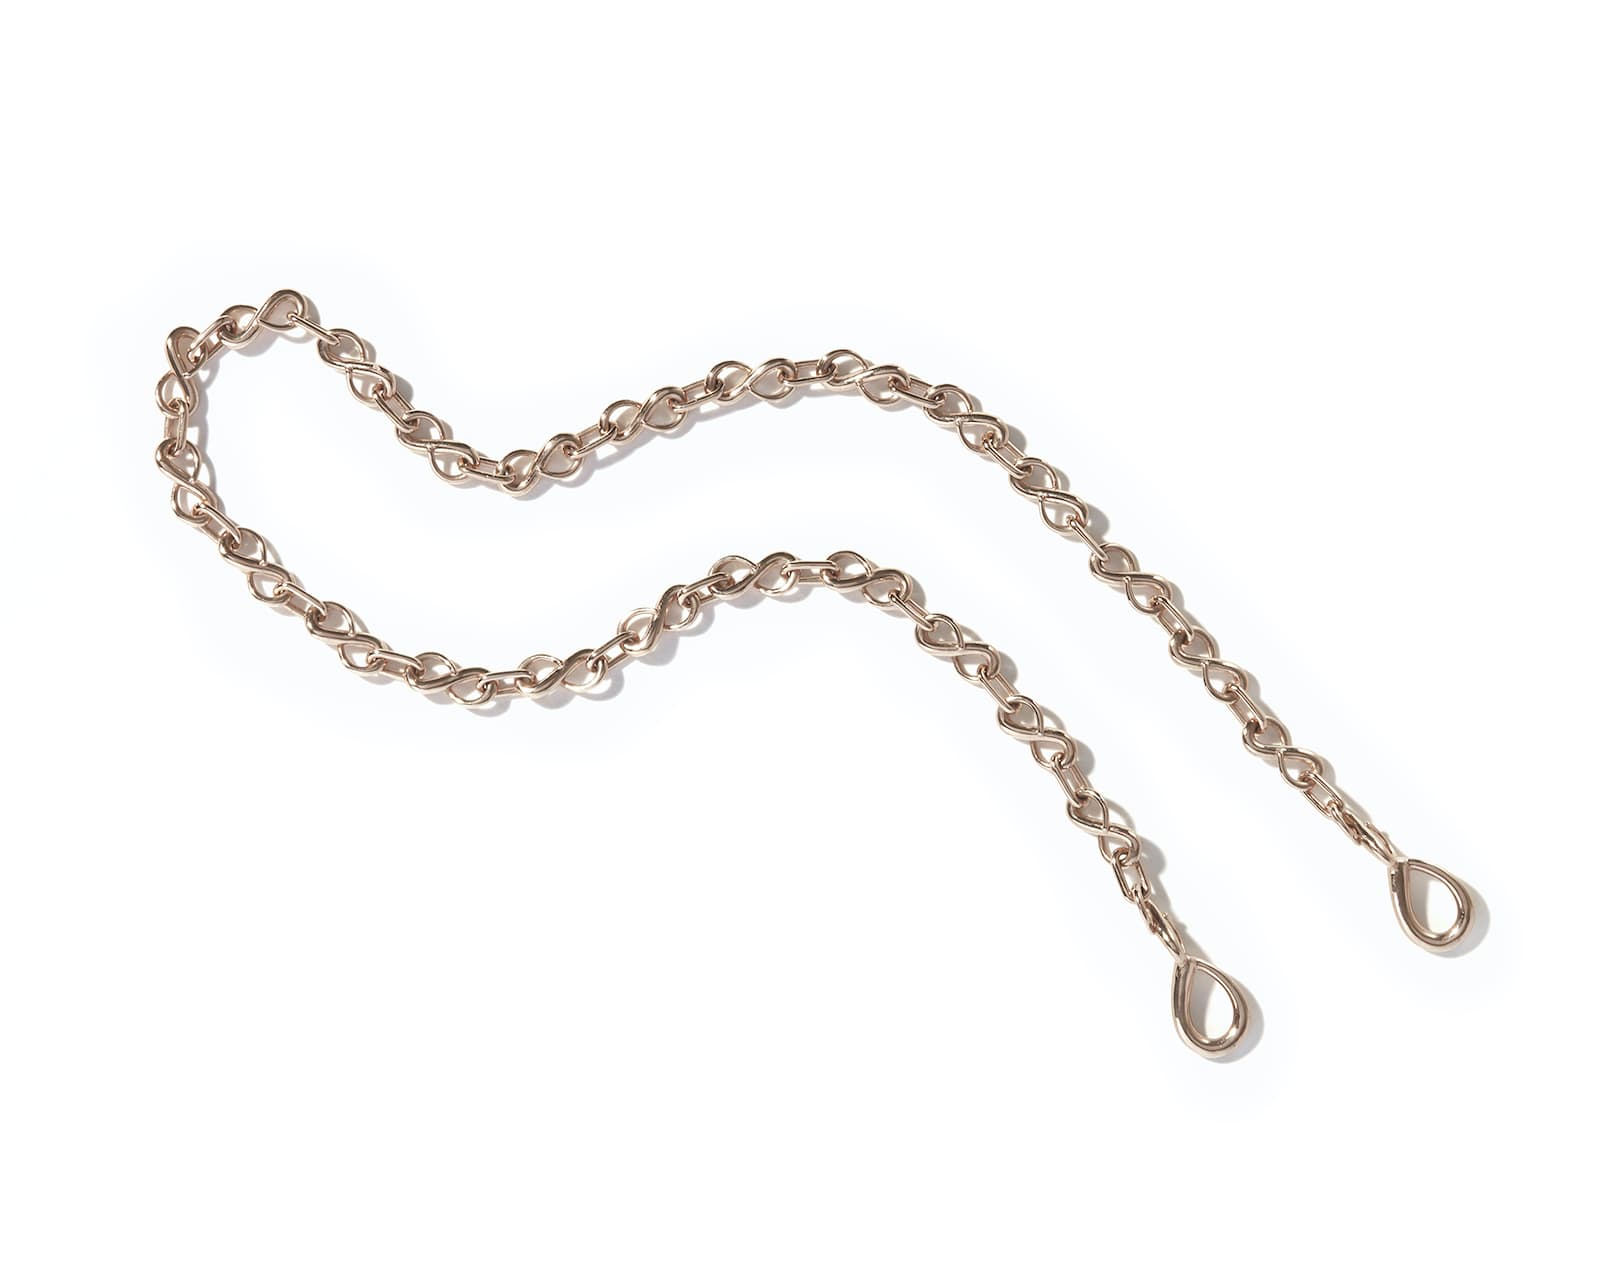 Brown gold infinity link chain against white backdrop